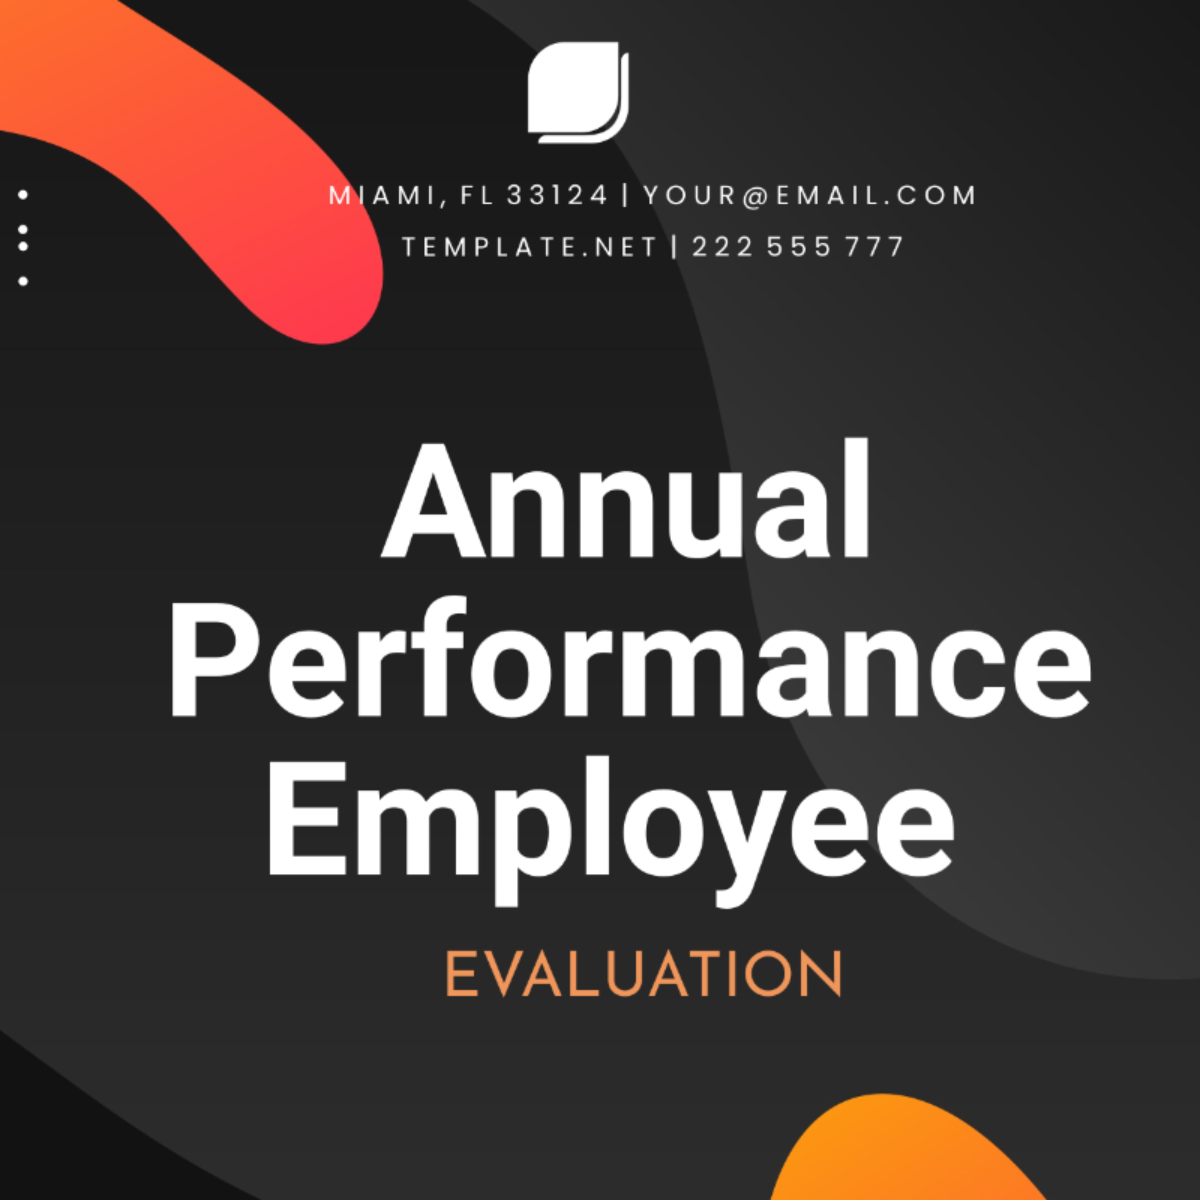 Annual Performance Evaluation Template